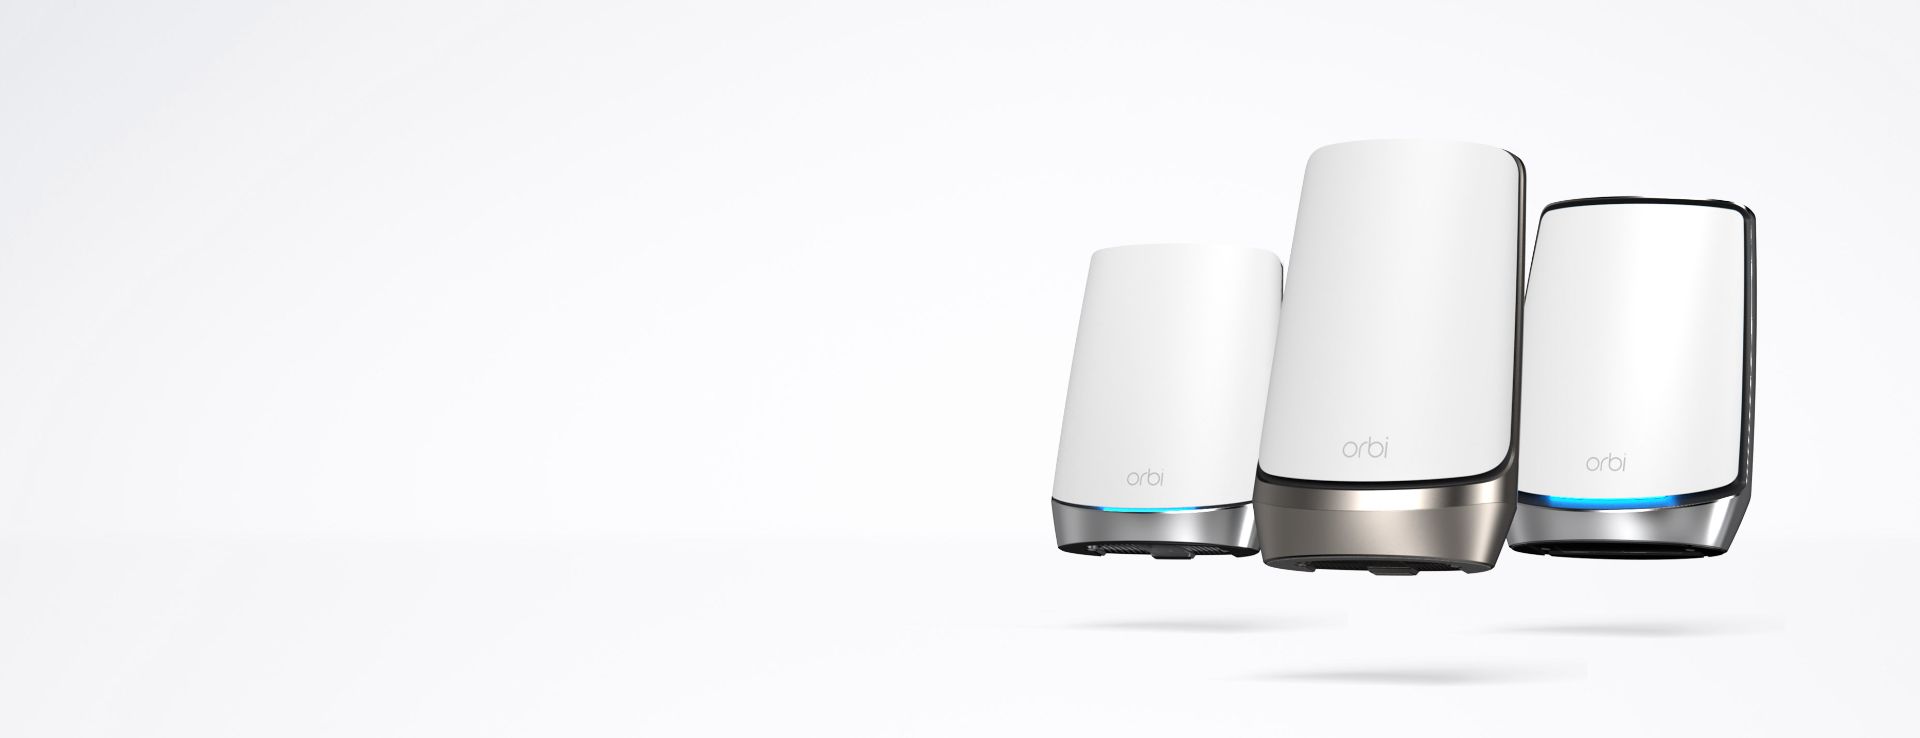 ORBI WHOLE-HOME MESH WIFI IN A CLASS OF ITS OWN